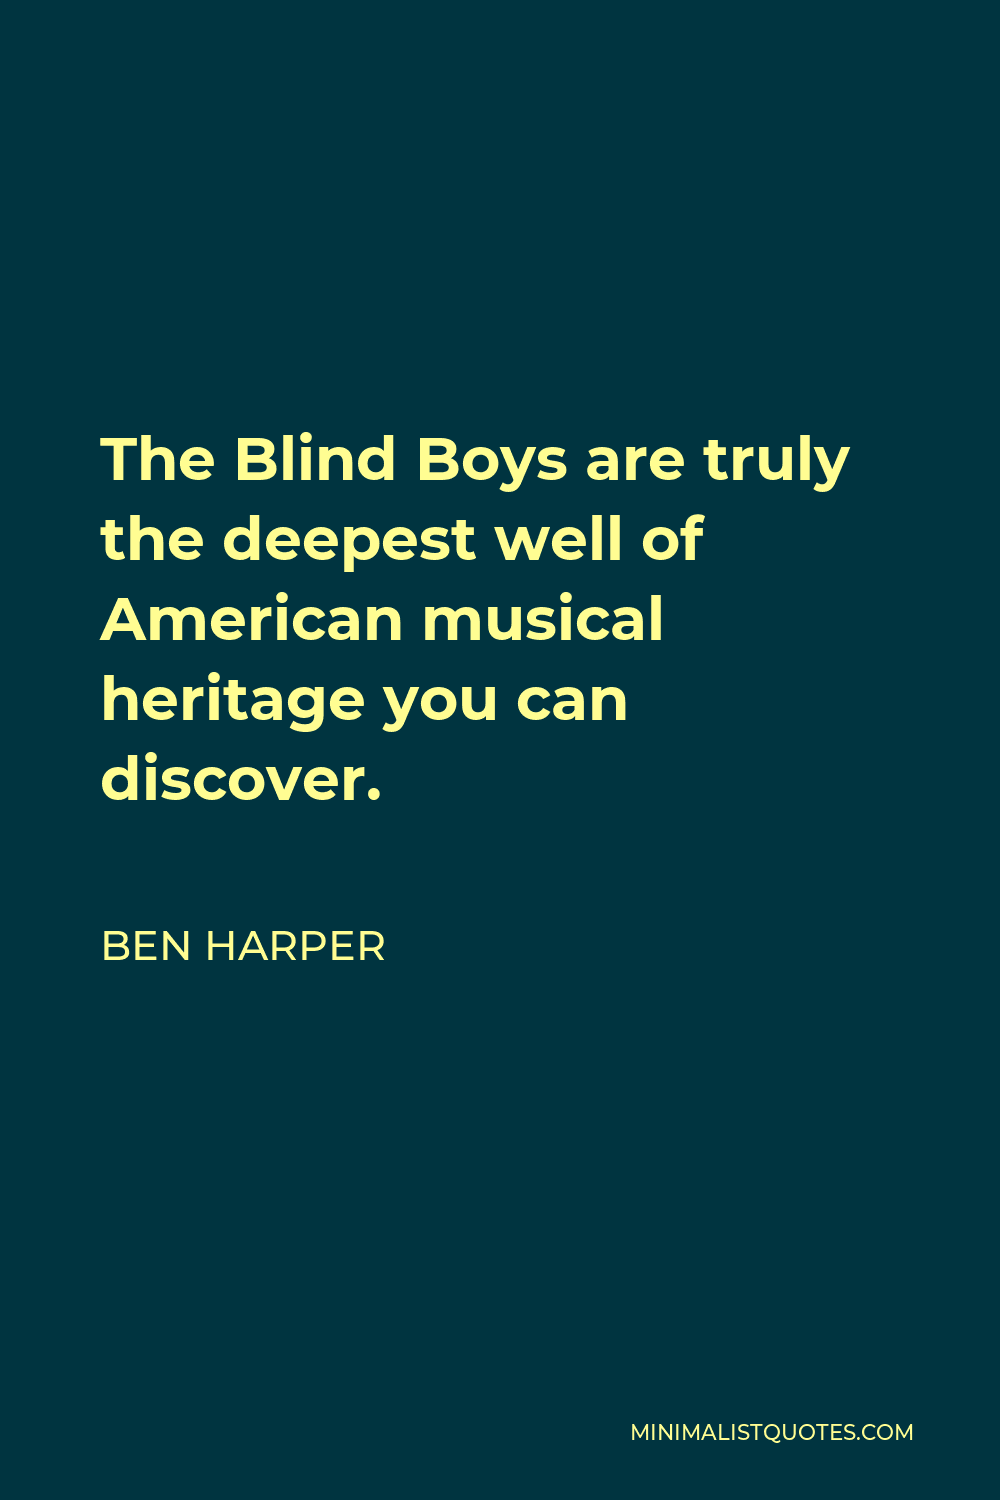 Ben Harper Quote - The Blind Boys are truly the deepest well of American musical heritage you can discover.